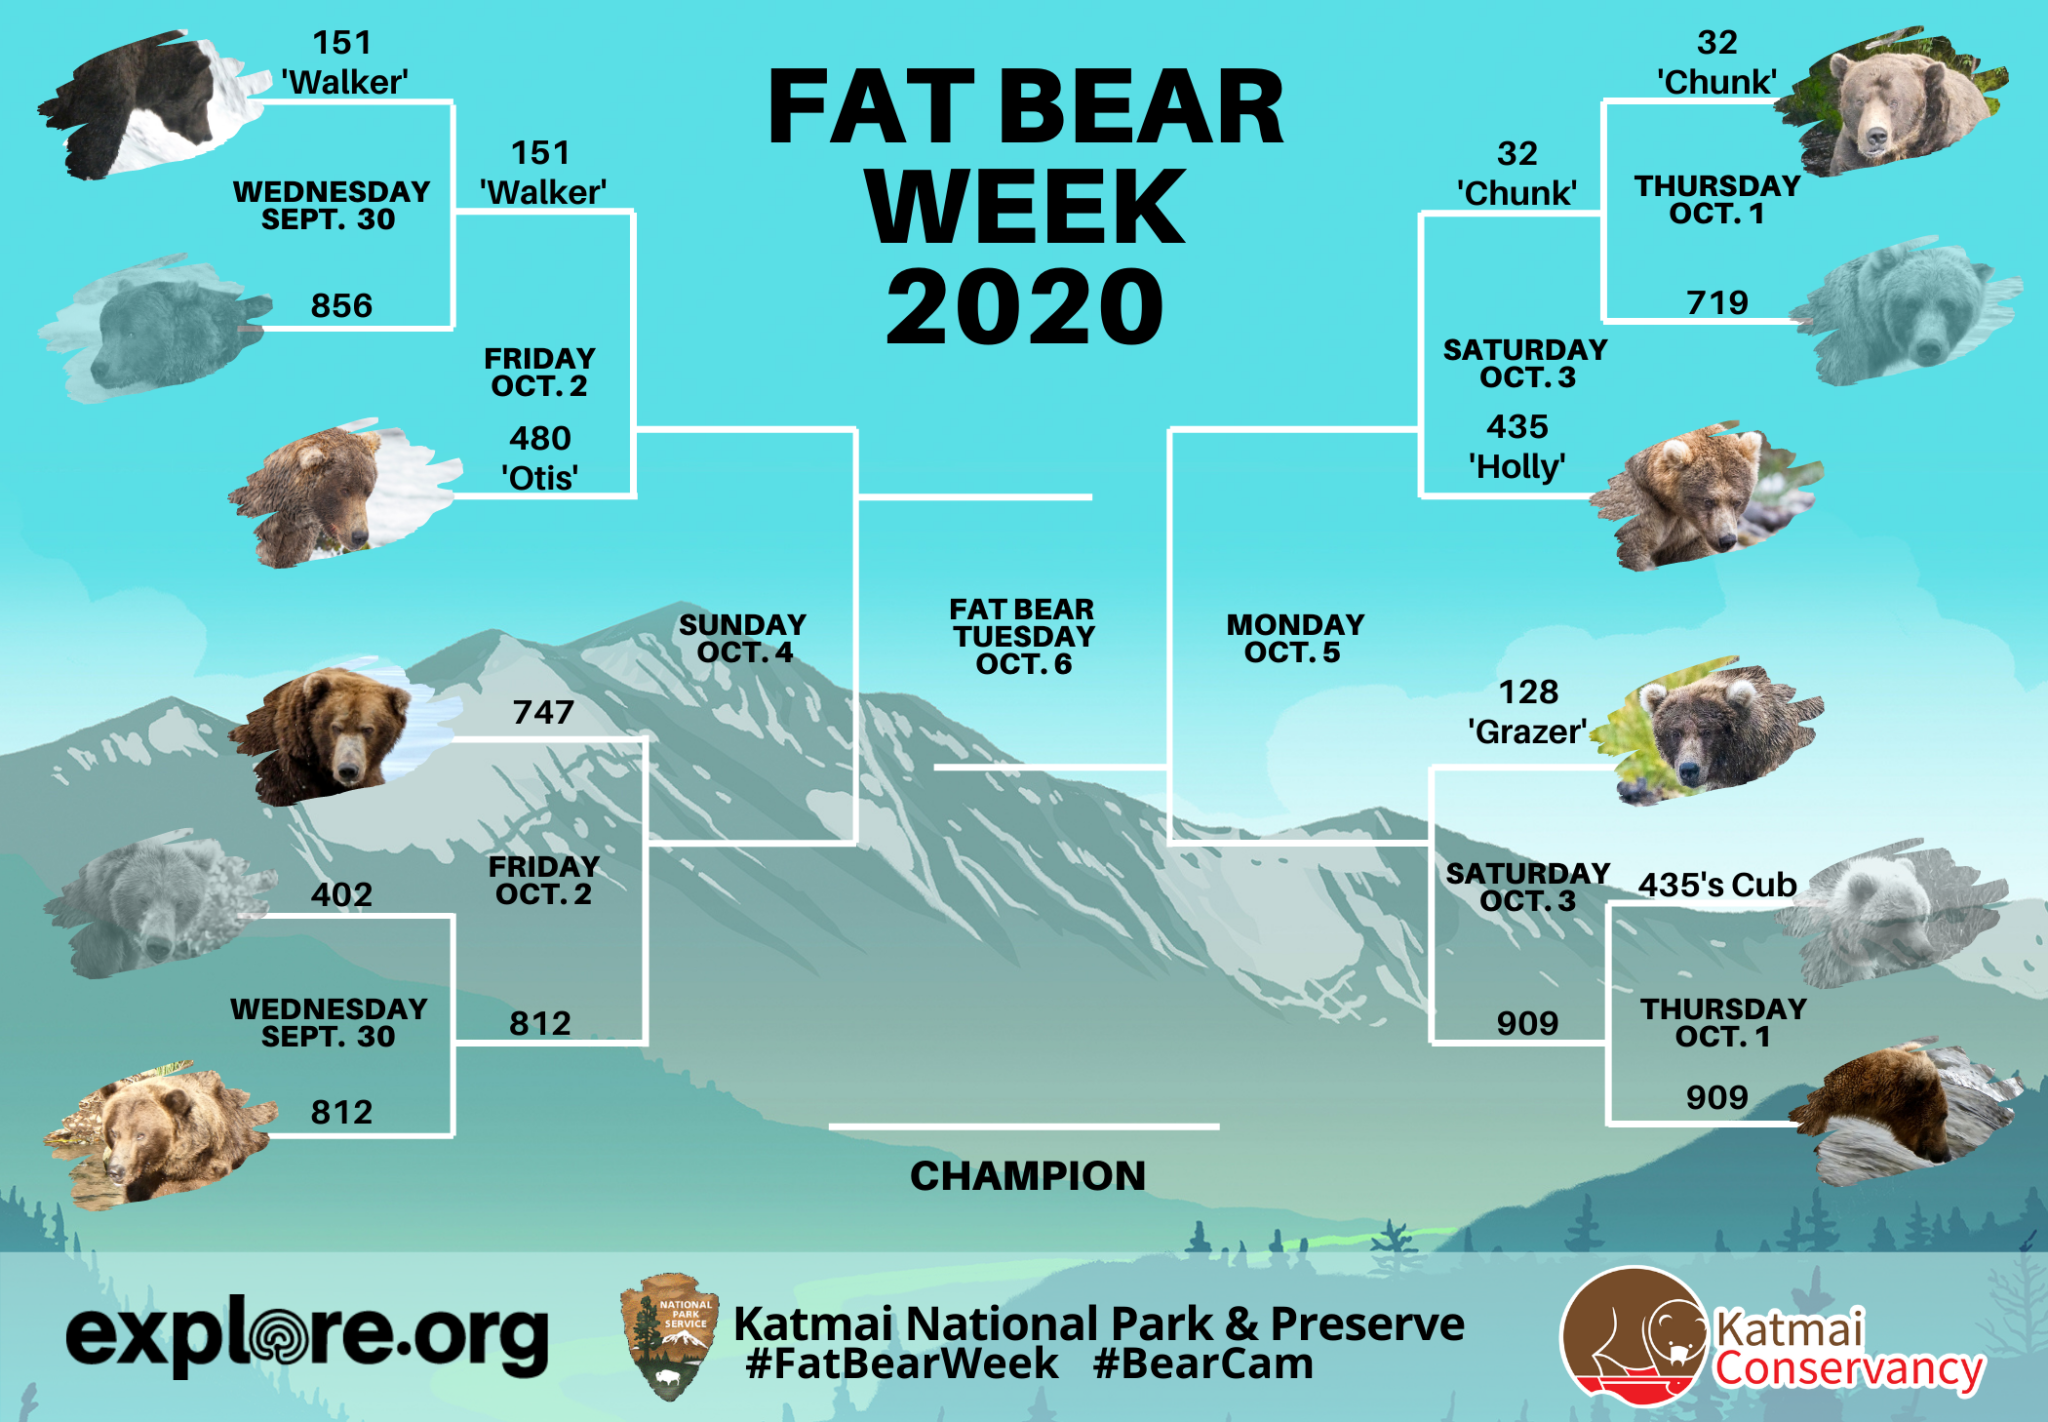 'The fattest Fat Bear Week ever' Large salmon runs key in this year's